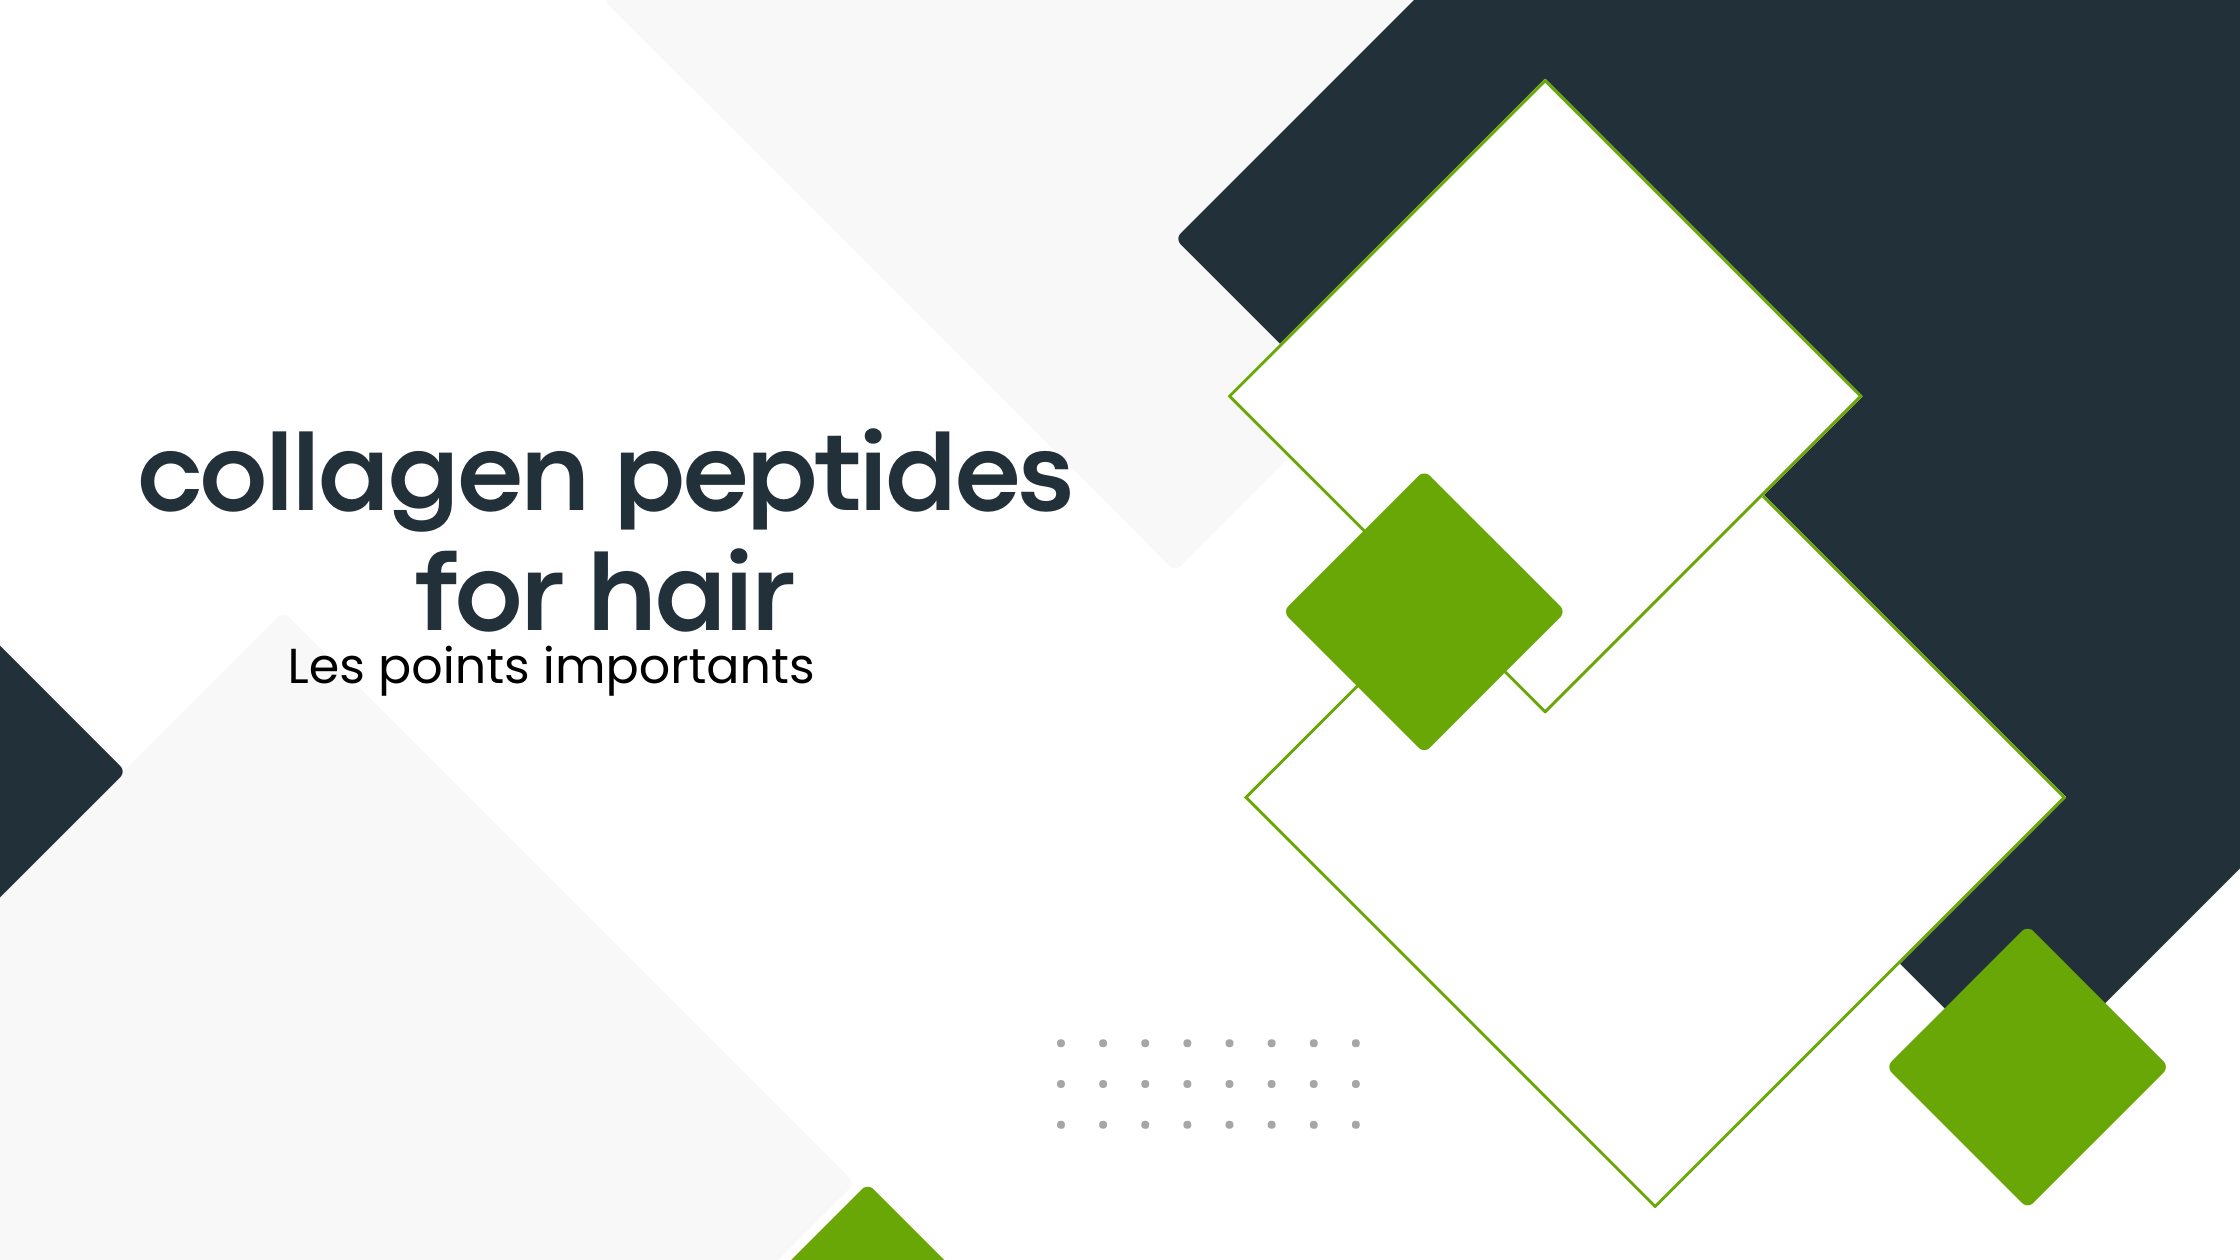 collagen peptides for hair | Les points importants